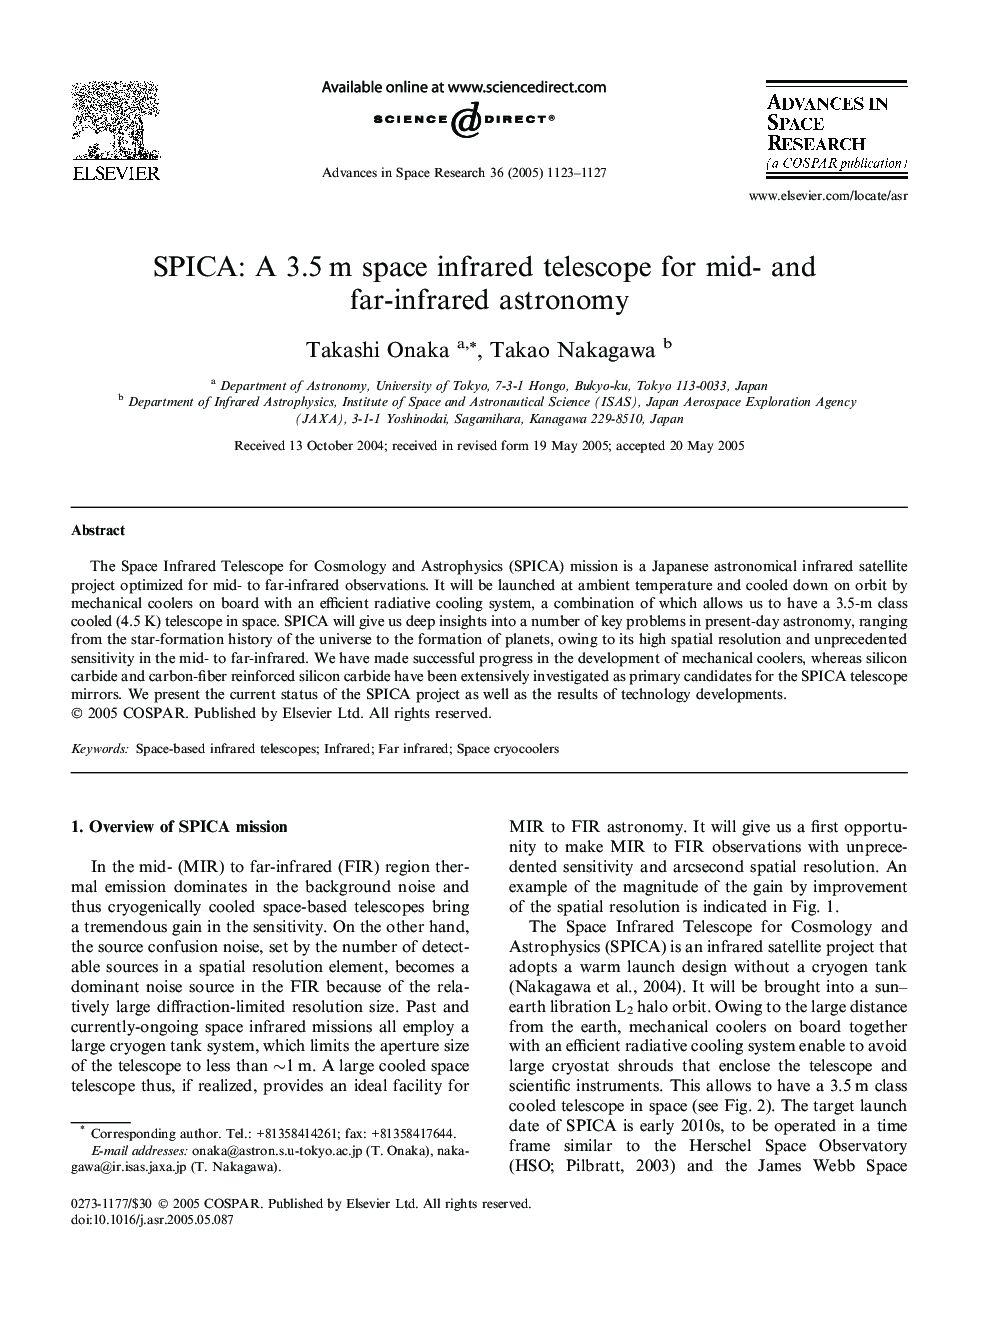 SPICA: A 3.5Â m space infrared telescope for mid- and far-infrared astronomy